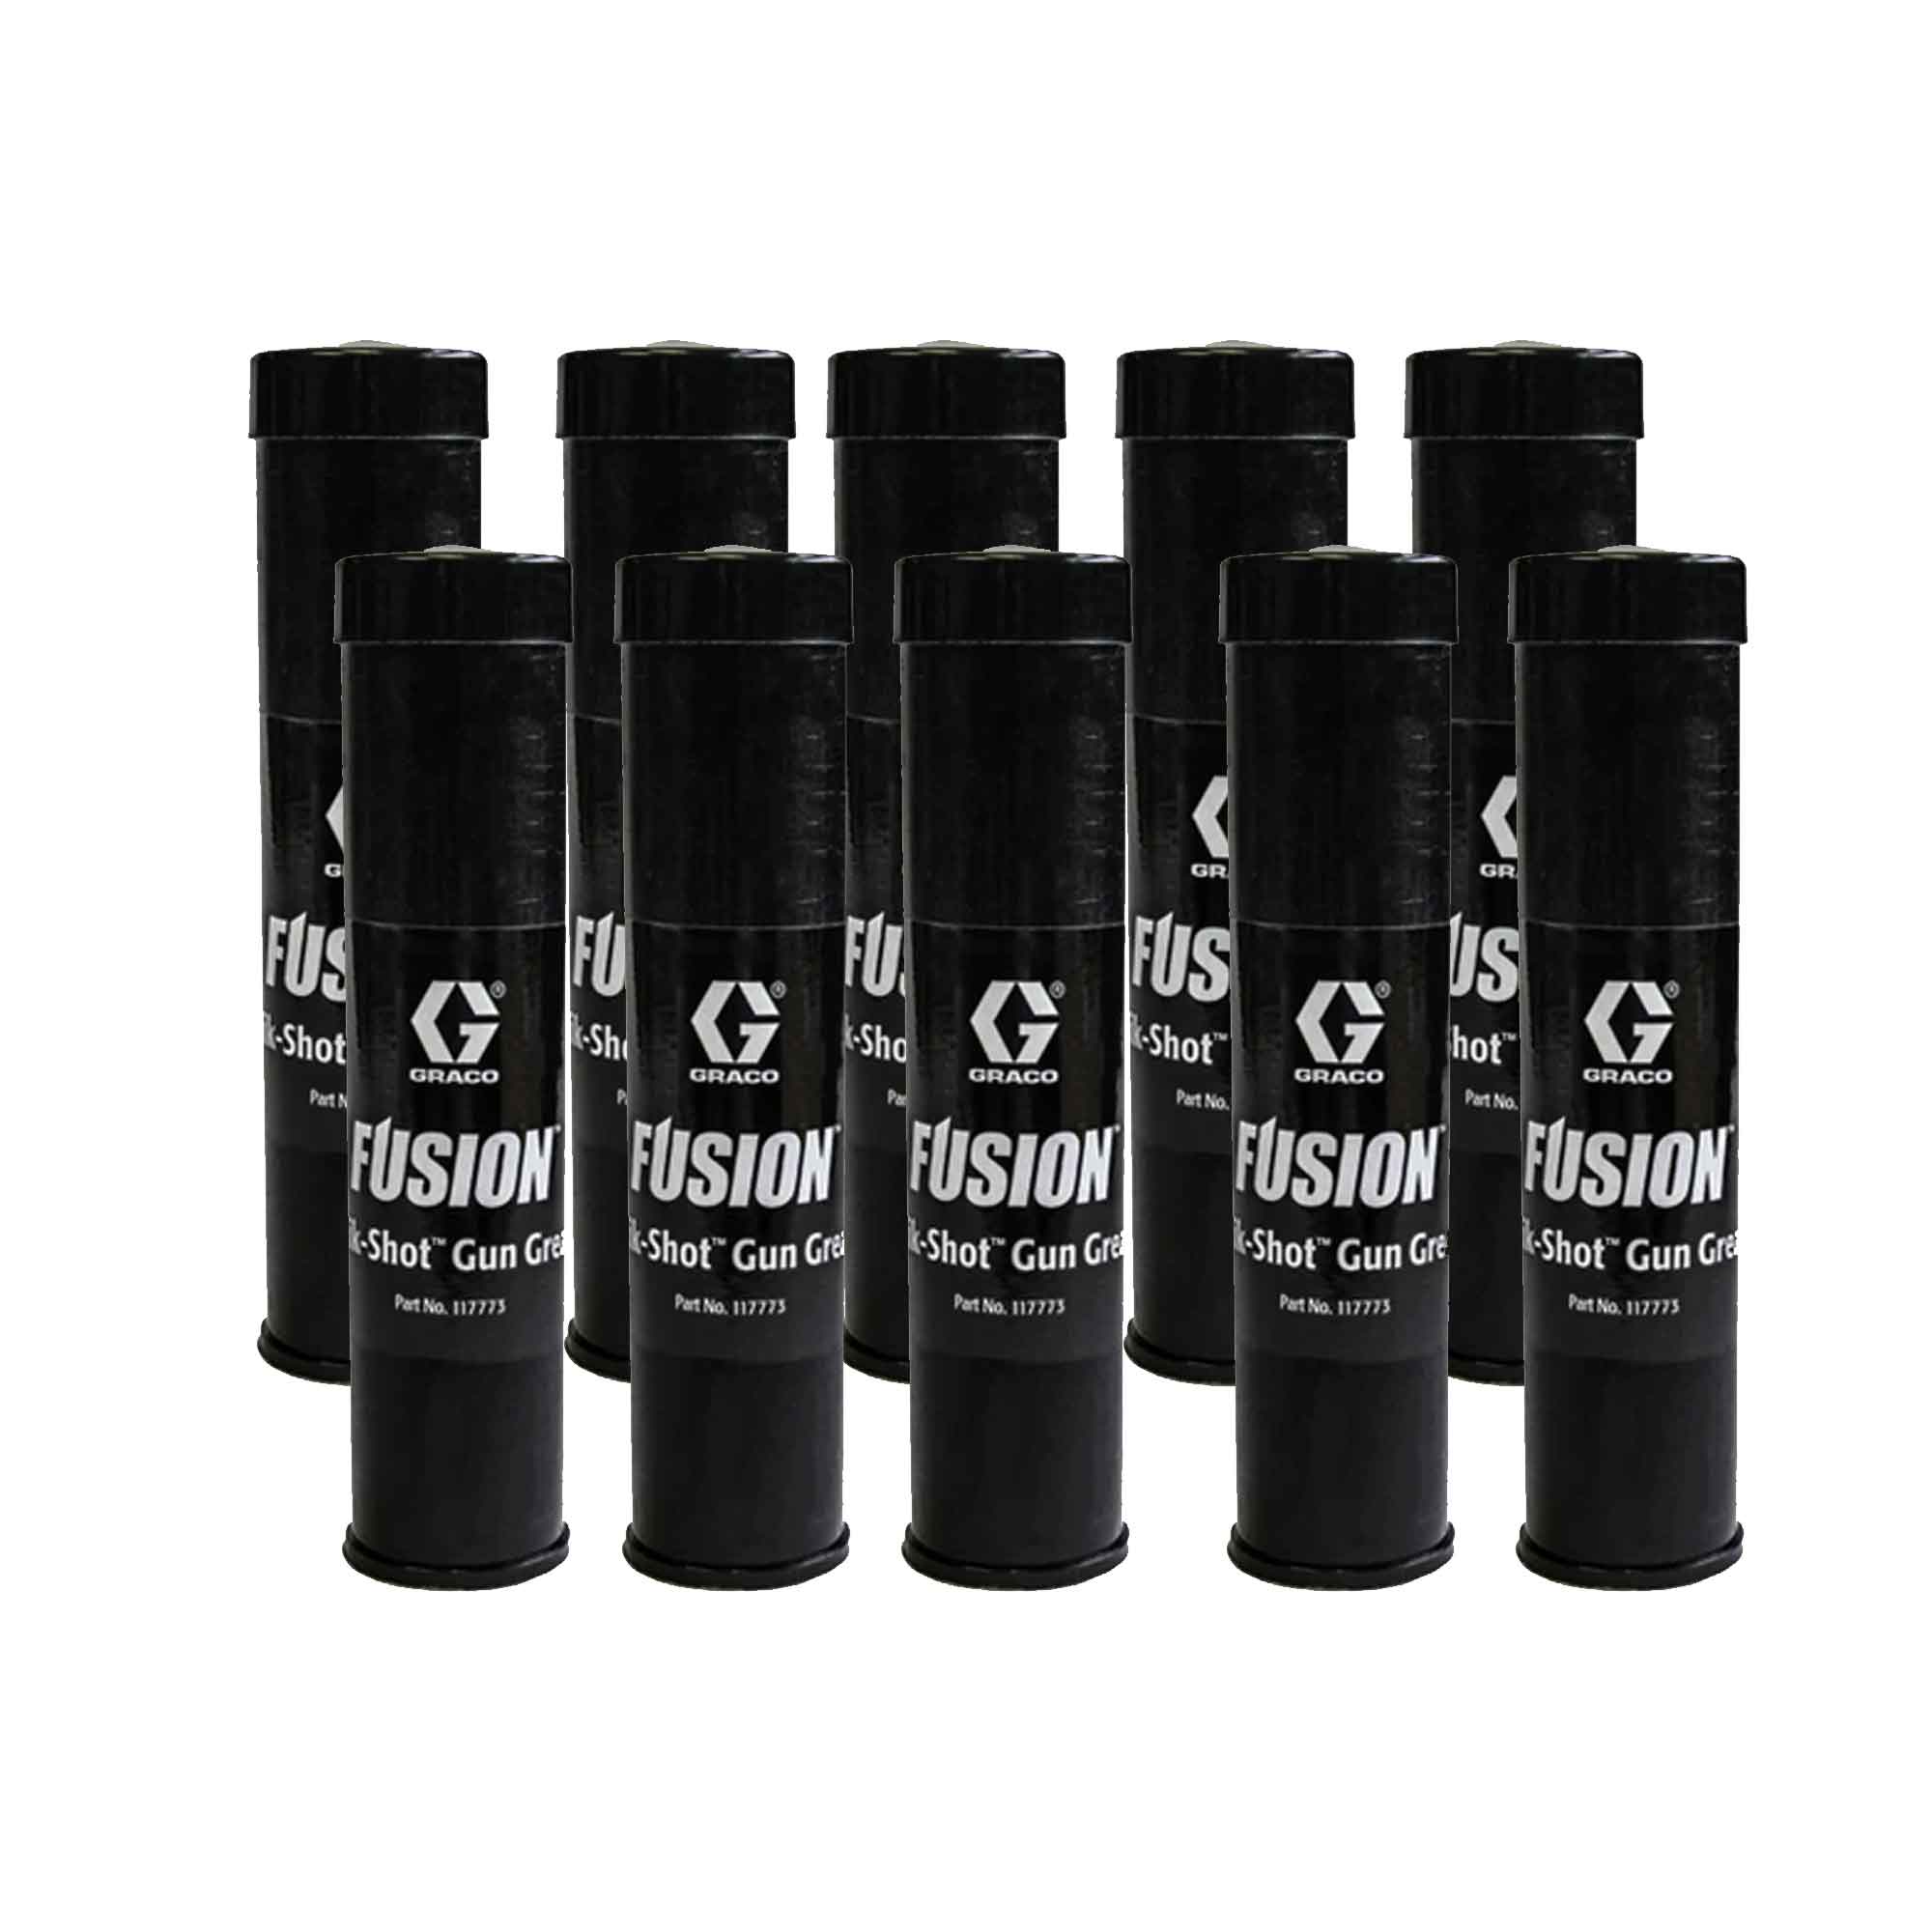 248280 - Fusion Grease Cartridge Kit 3 OZ, Package of 10 - PURspray